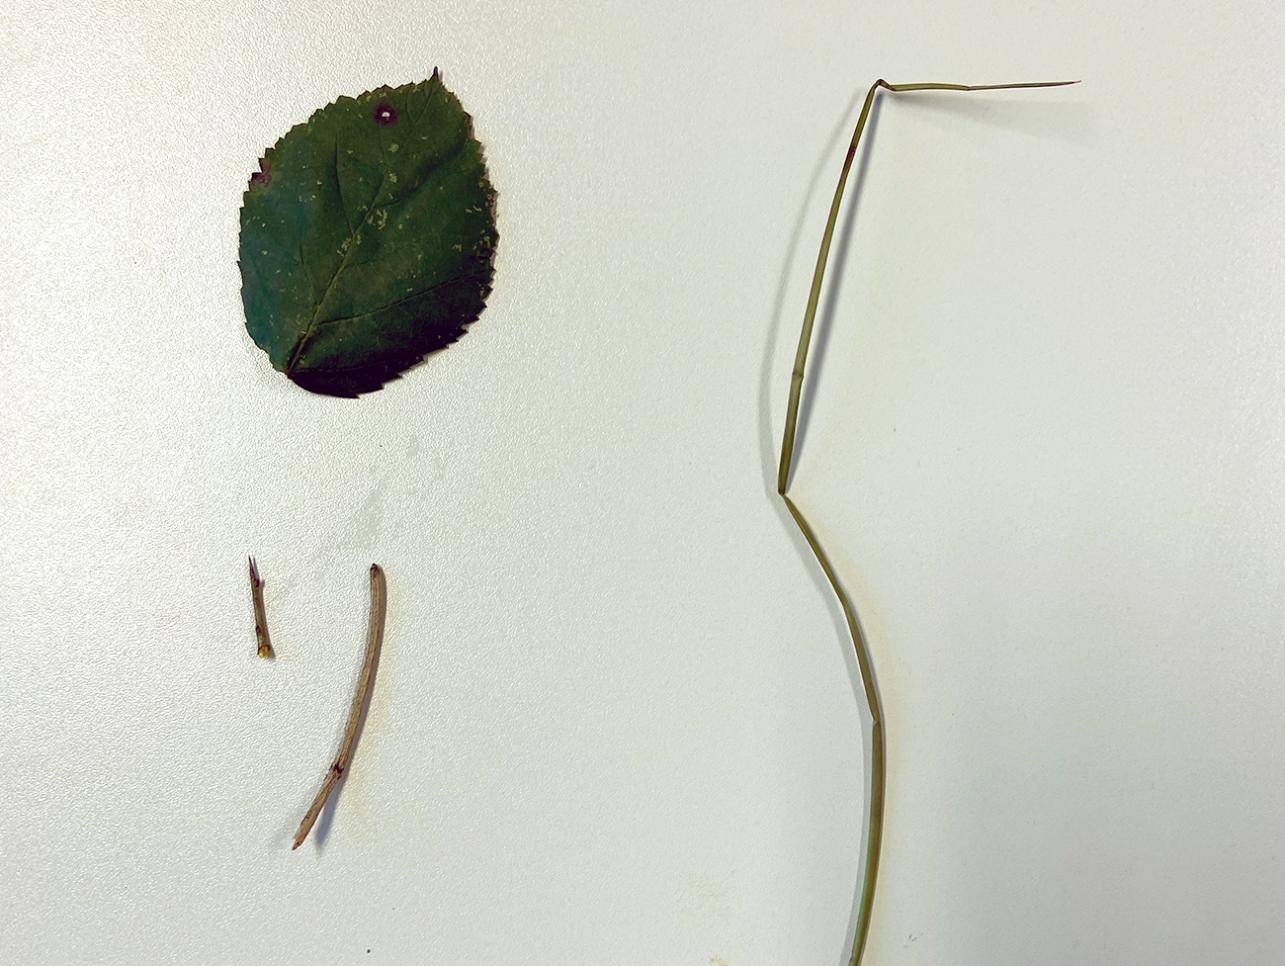 Leaf, blade of grass and pieces of wood